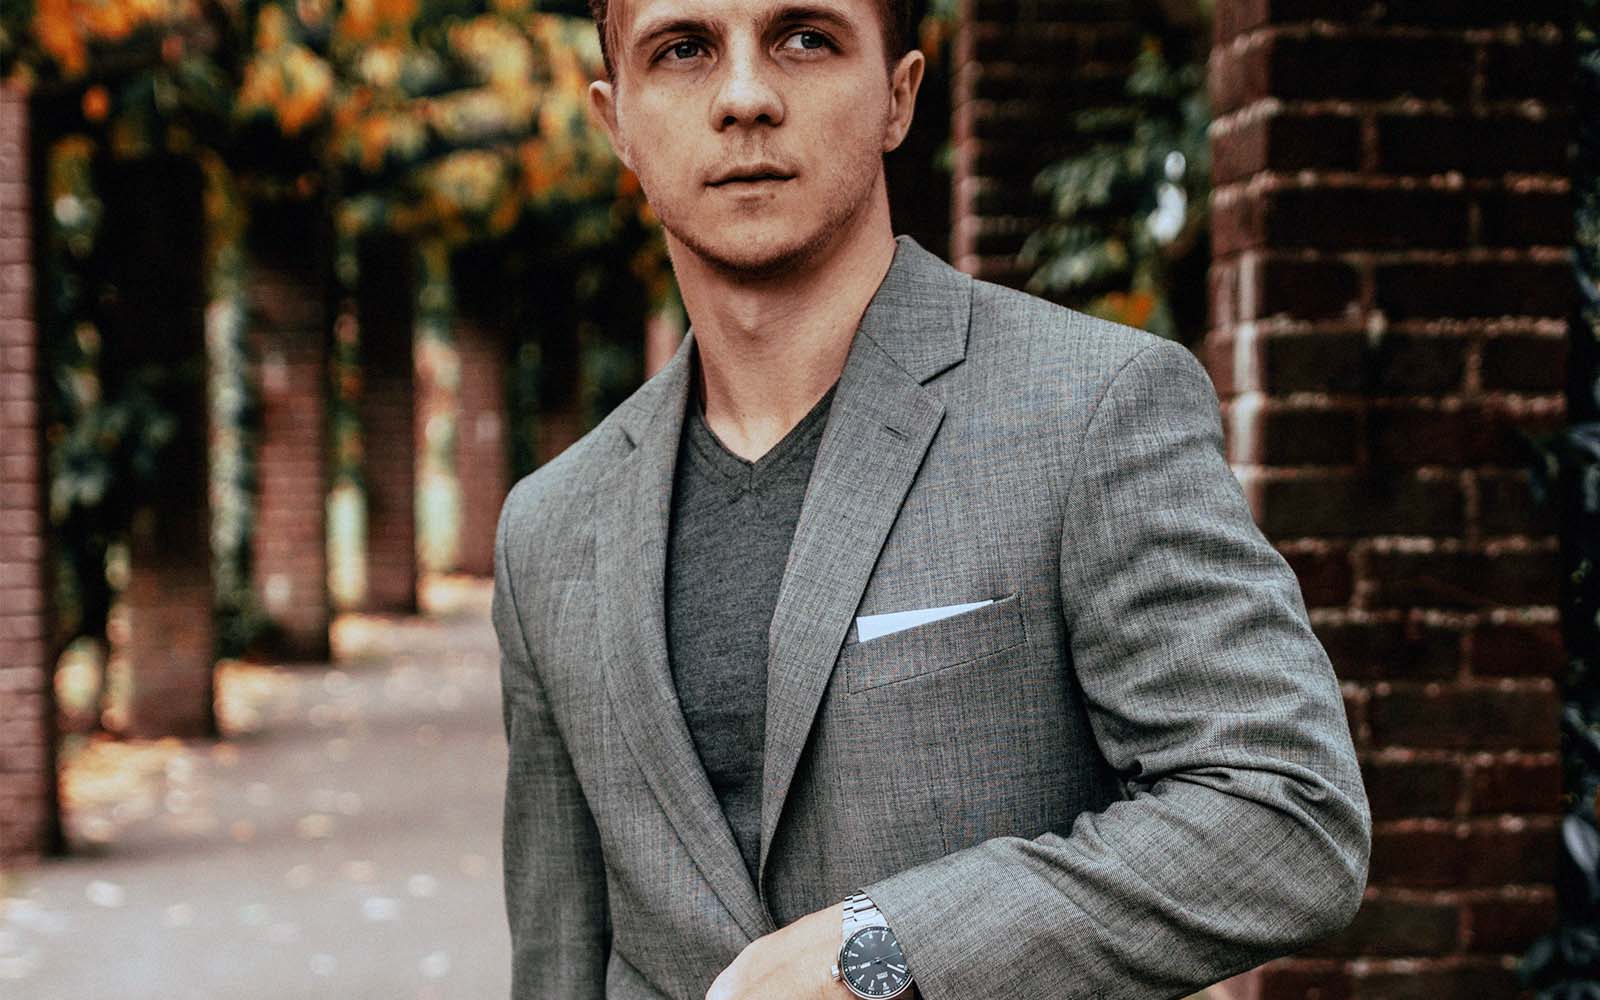 Male model wearing grey suit with a grey shirt